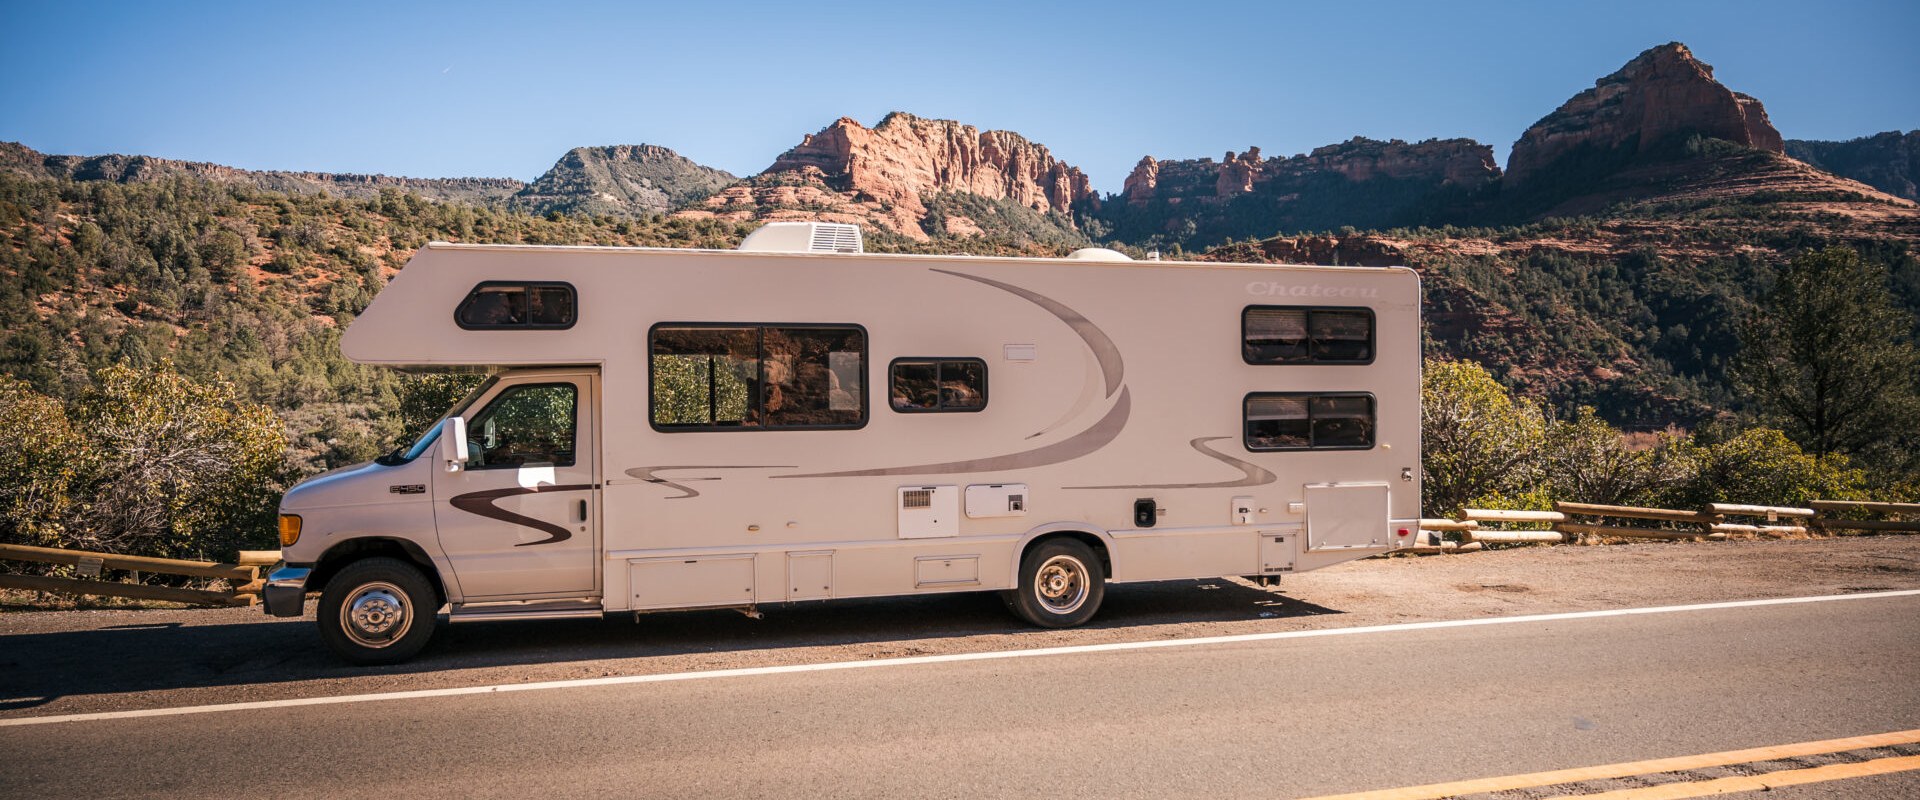 What Recreational Vehicles are Allowed at Assisted Living Facilities in Central Texas?